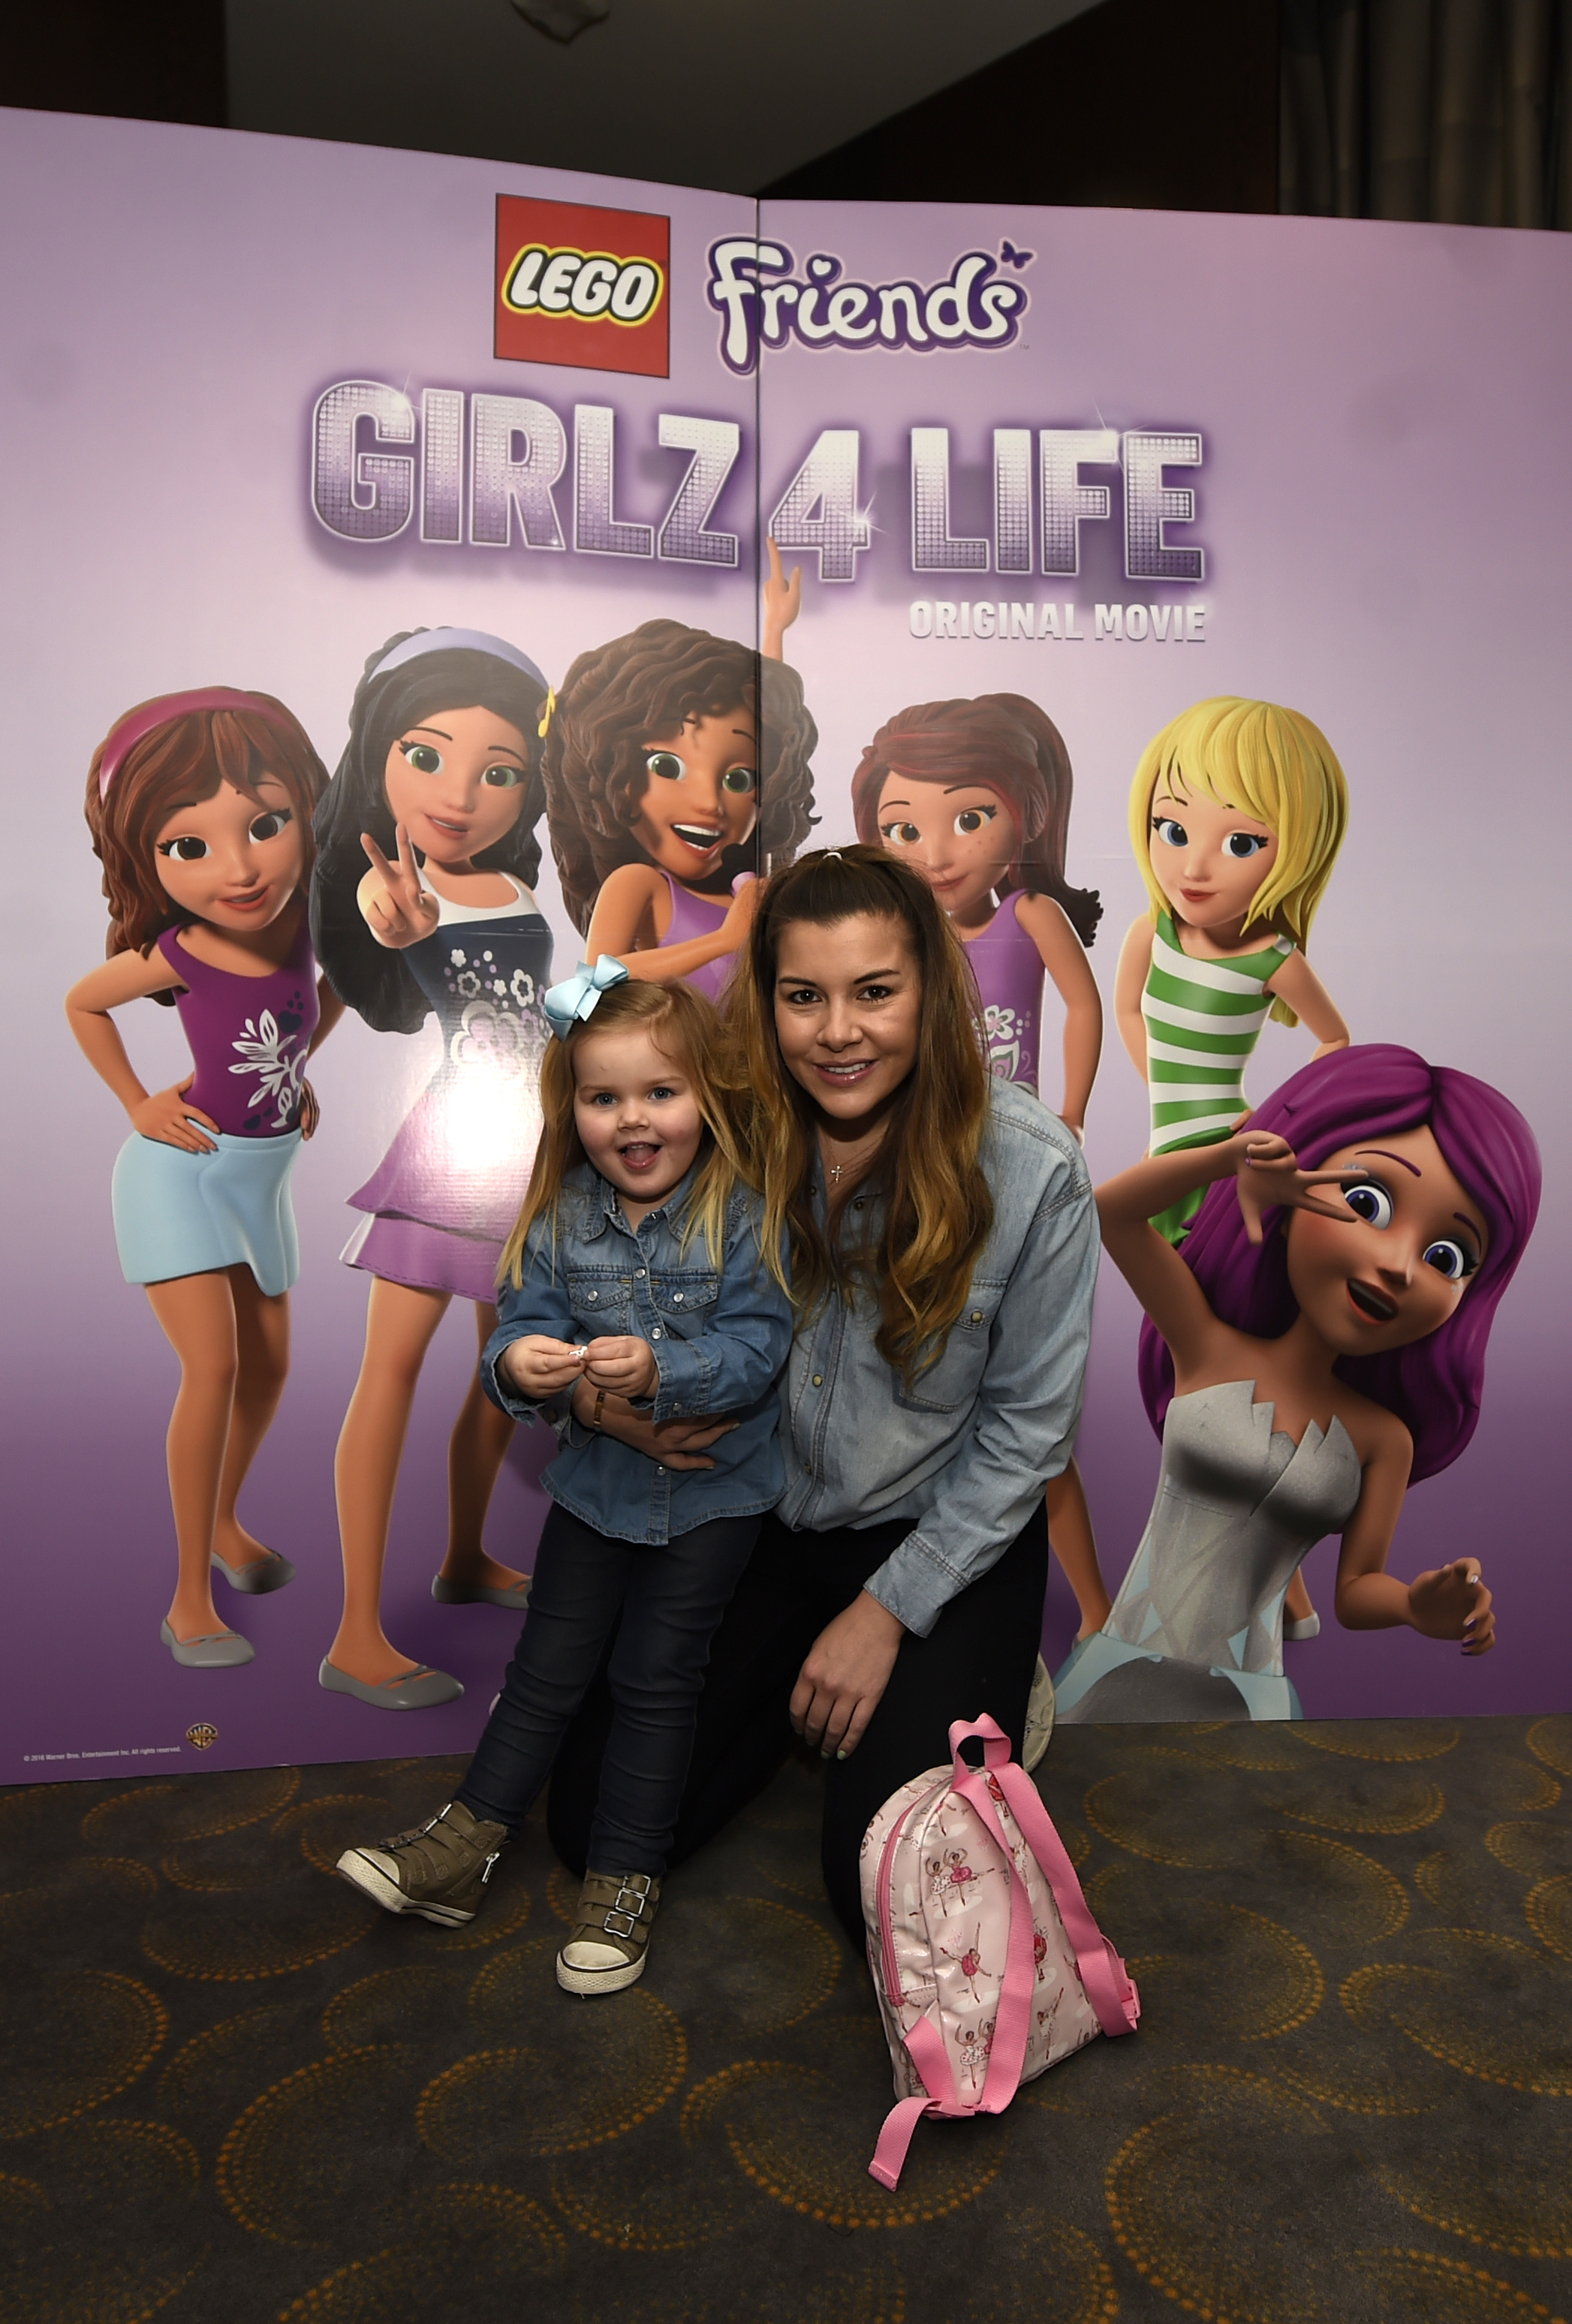 Imogen Thomas and daughter Ariana Siena attend the premiere screening of LEGO FRIENDS: GIRLZ 4 LIFE in London, LEGO FRIENDS: GIRLZ 4 LIFE is available on DVD from 15th February.